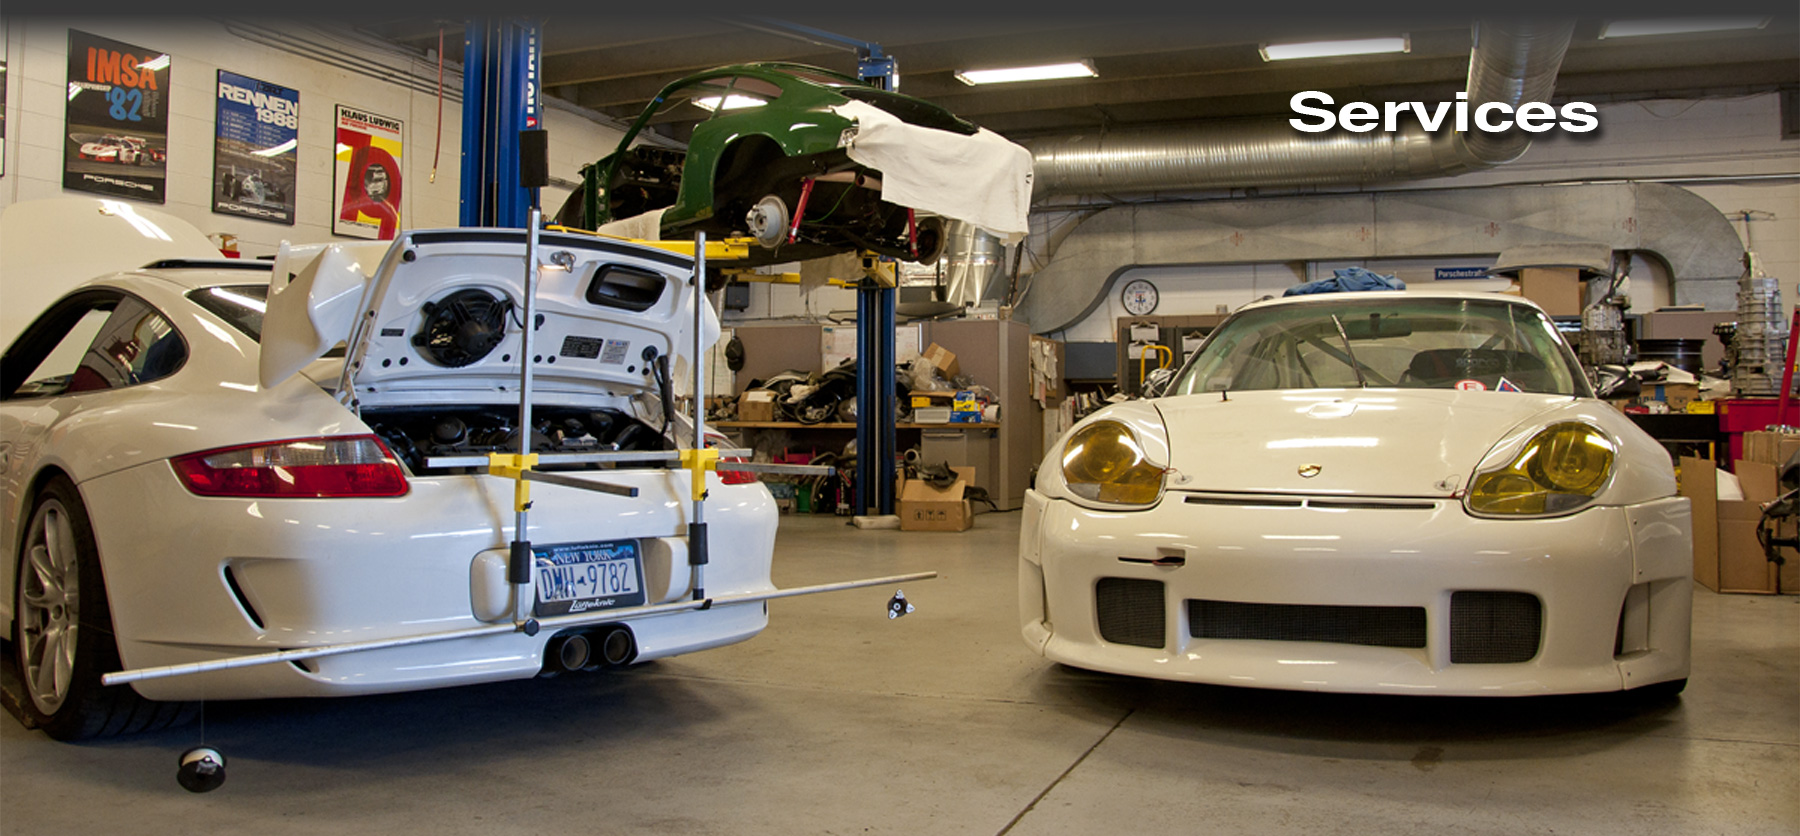 Lüfteknic services header showing a 997 GT3, 912 and 996 RSR being worked on inside Lüfteknic.